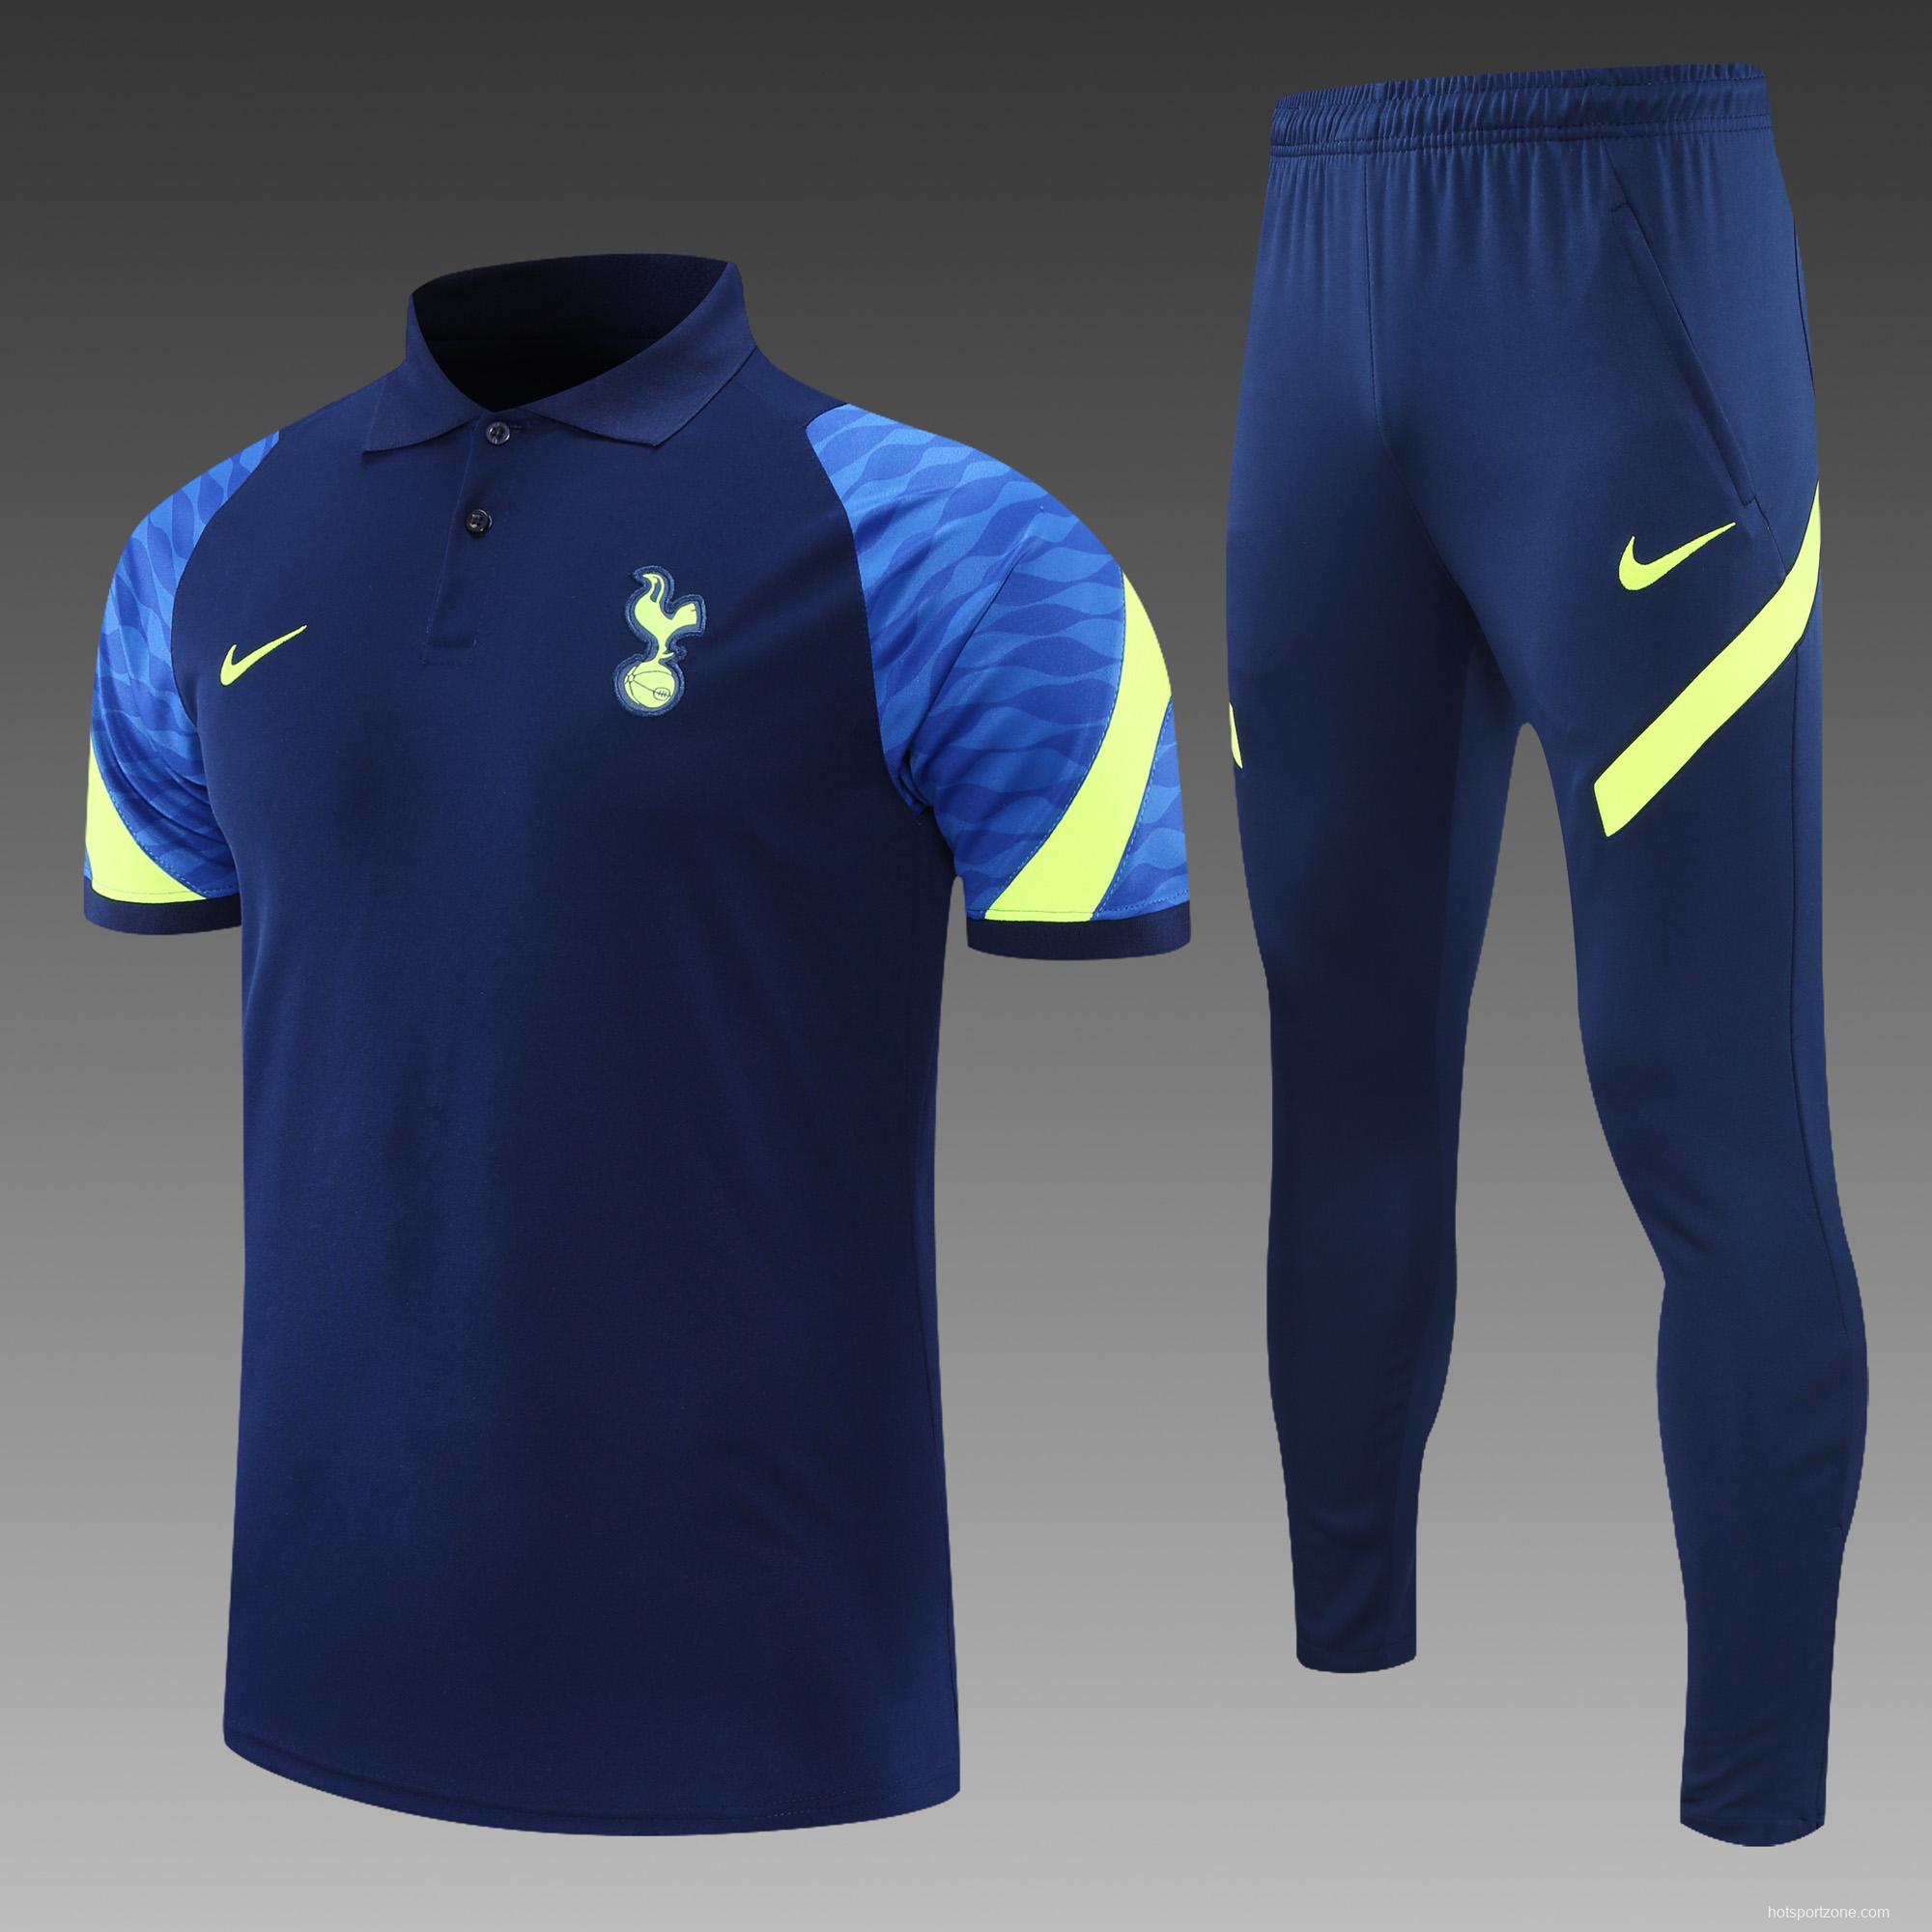 Tottenham Hotspur POLO kit Dark Blue(not supported to be sold separately)